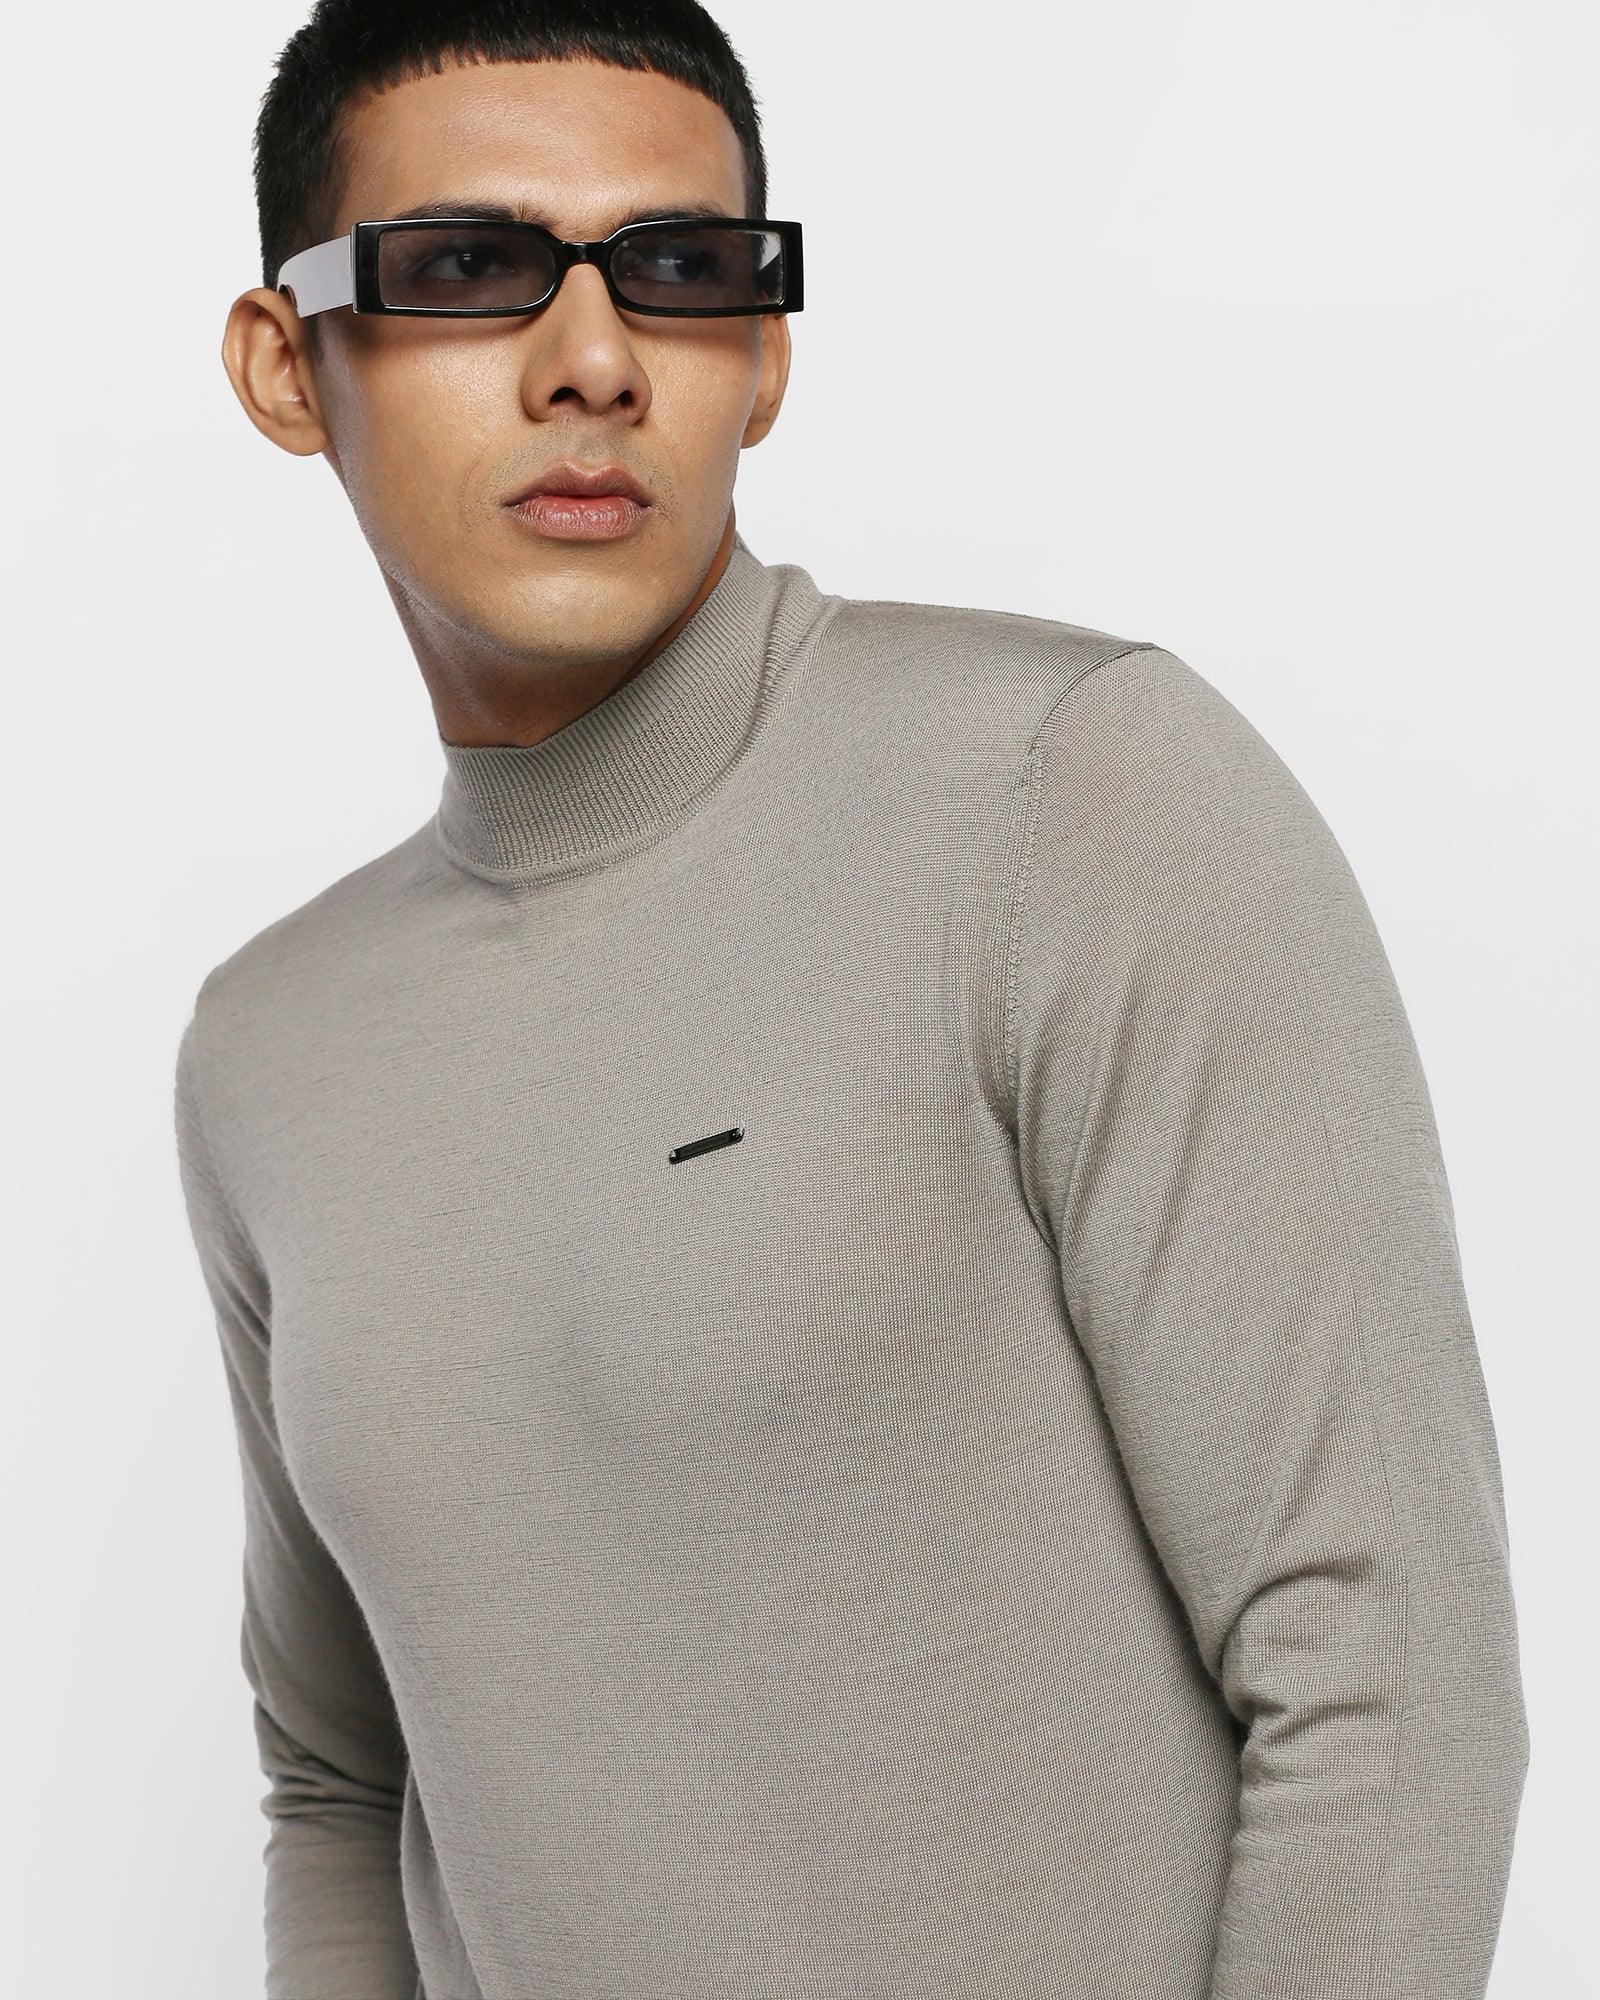 High Neck Grey Solid Sweater - Domin